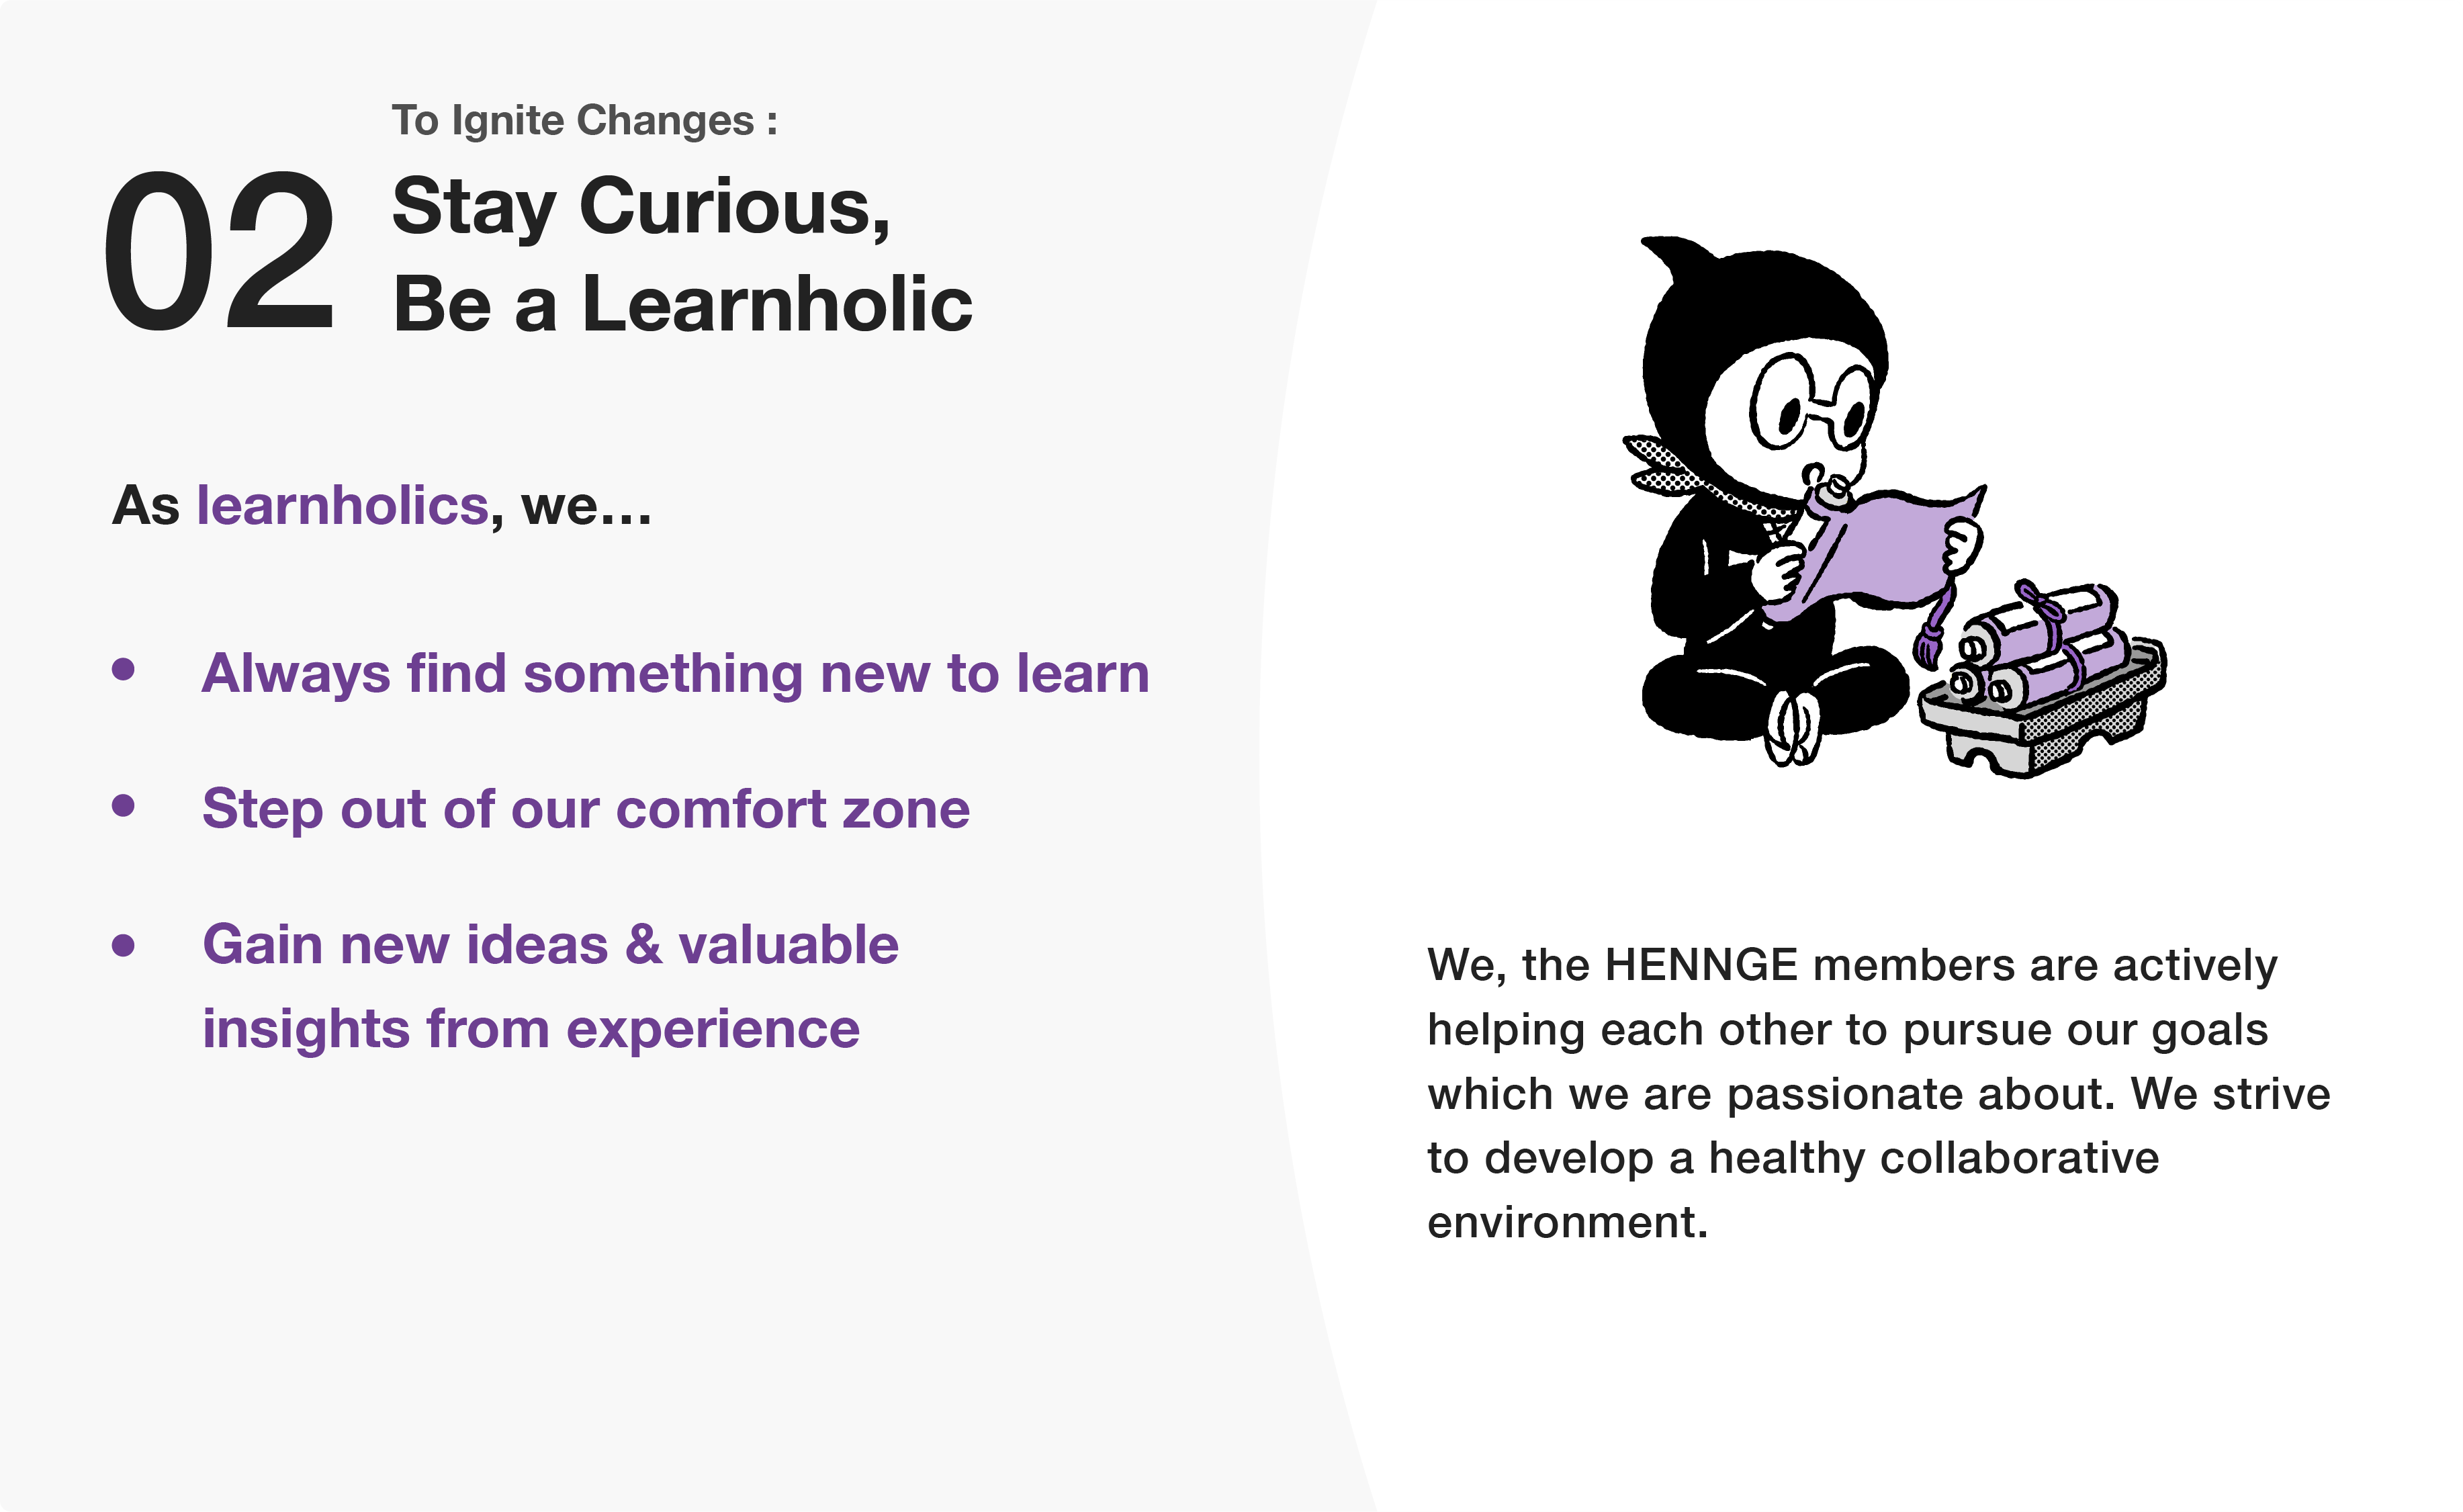 02 STAY CURIOUS, BE A LEARNAHOLIC